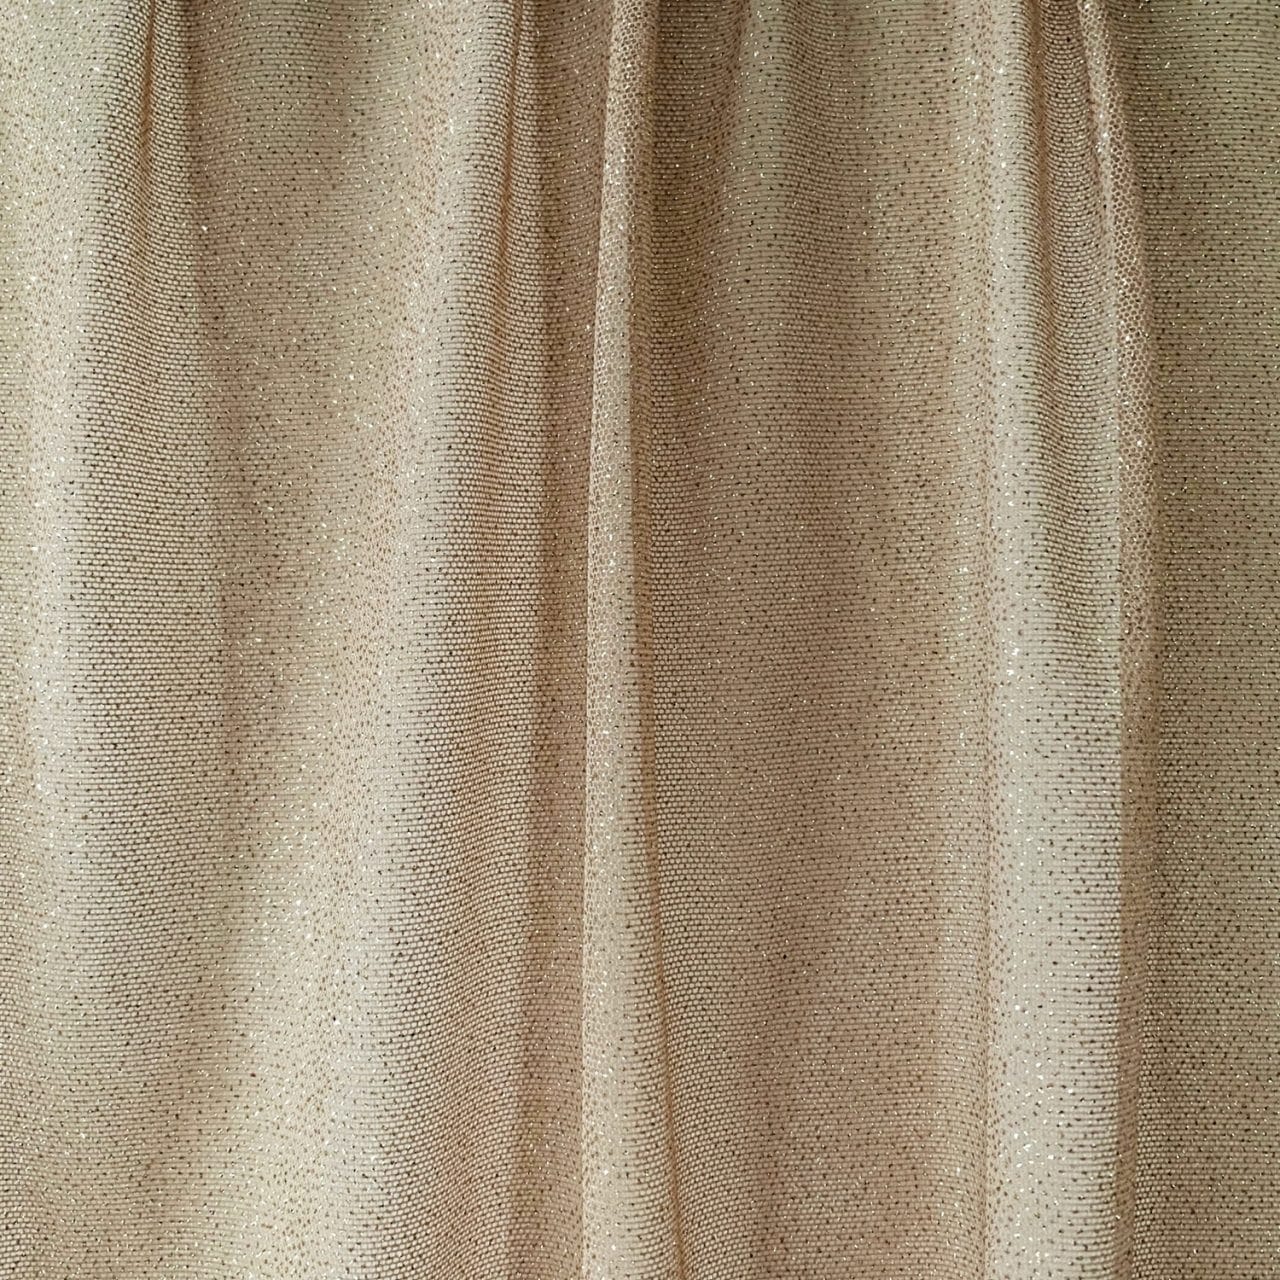 Nude Gold Glitter Mesh fabric features all over gold glitter on 2-way stretch nude polyester mesh making it ideal for both semi-fitted and draped garments.